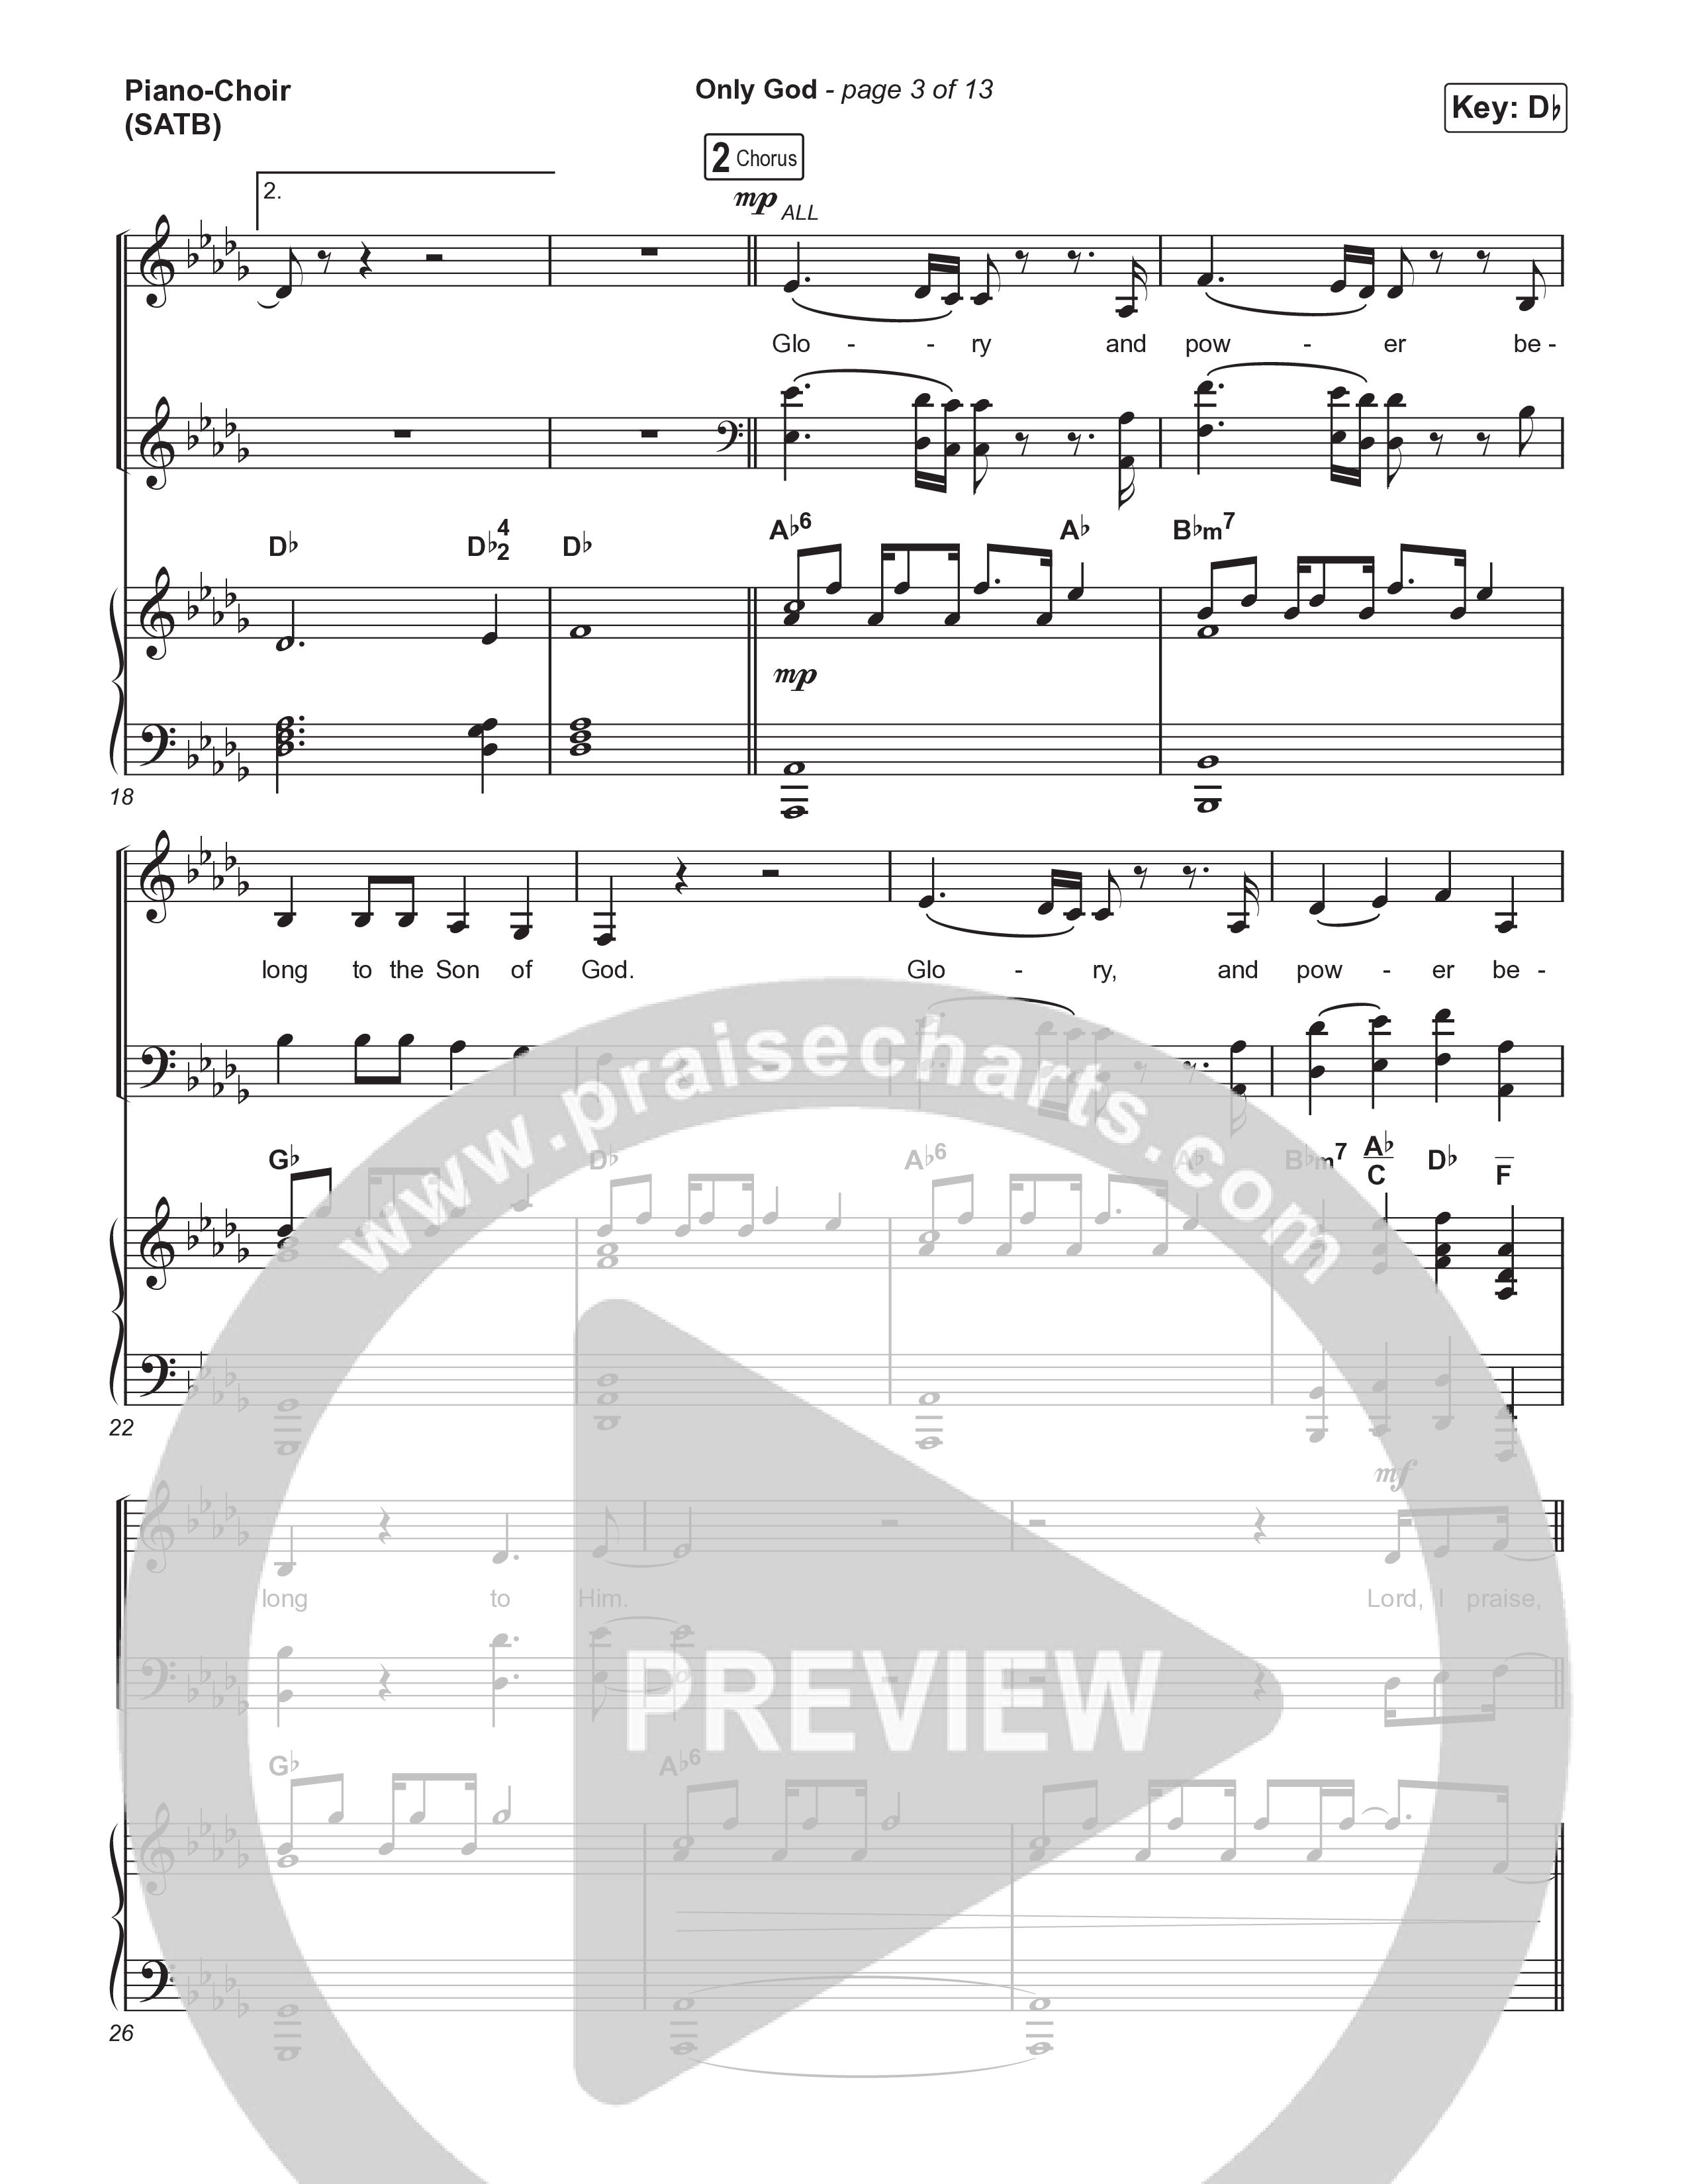 Only God Piano/Vocal (SATB) (Circuit Rider Music / Lucas McCloud)